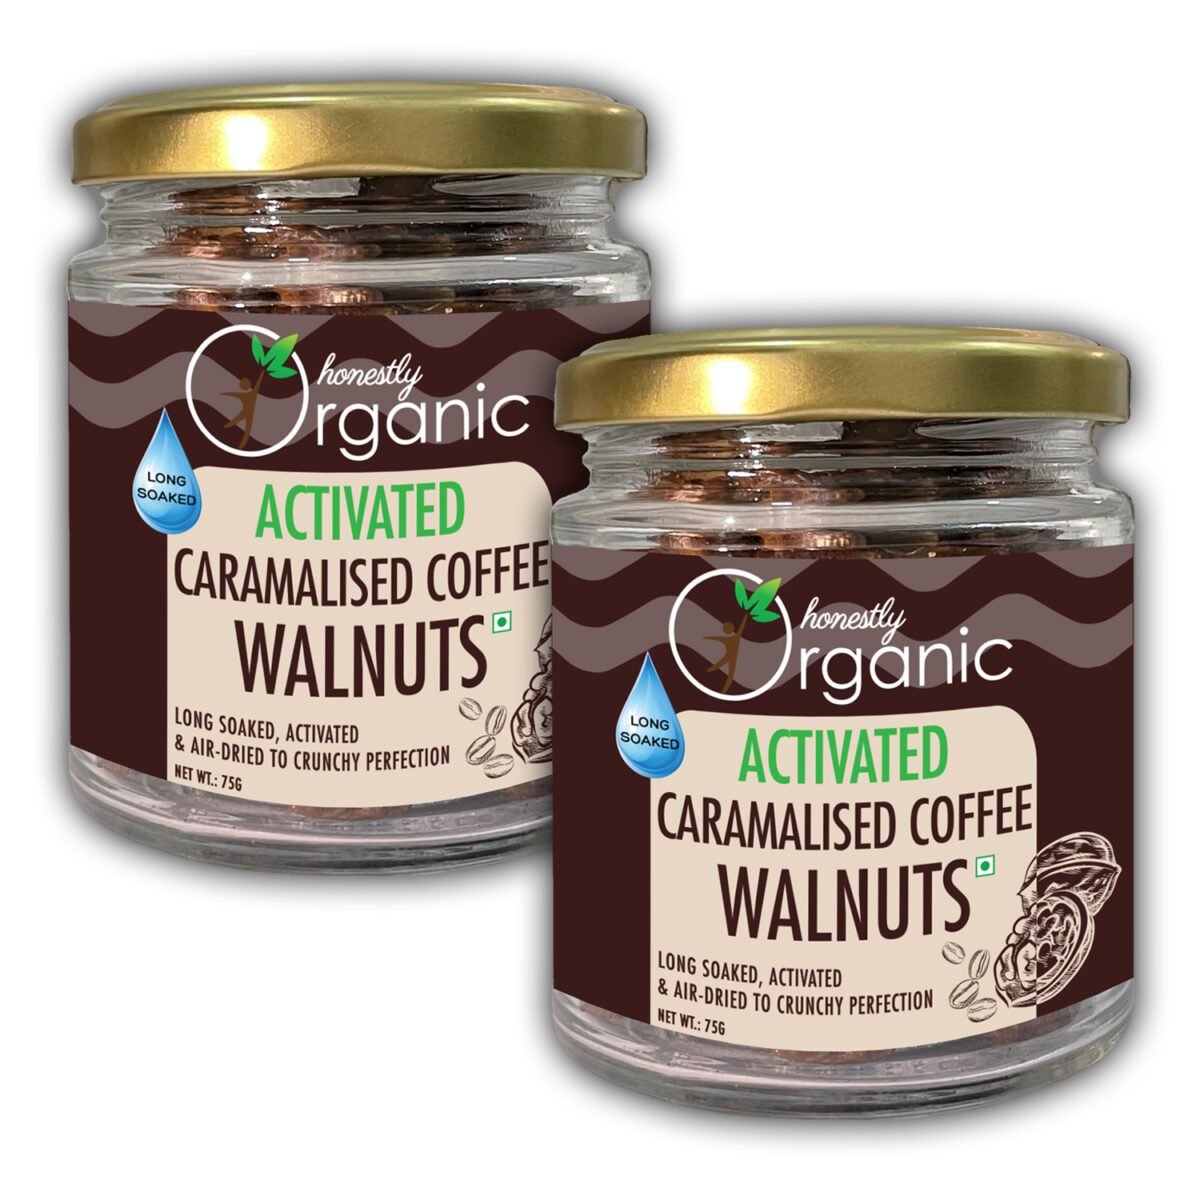 Caramelized-Coffee-Walnuts-front5-D-alive